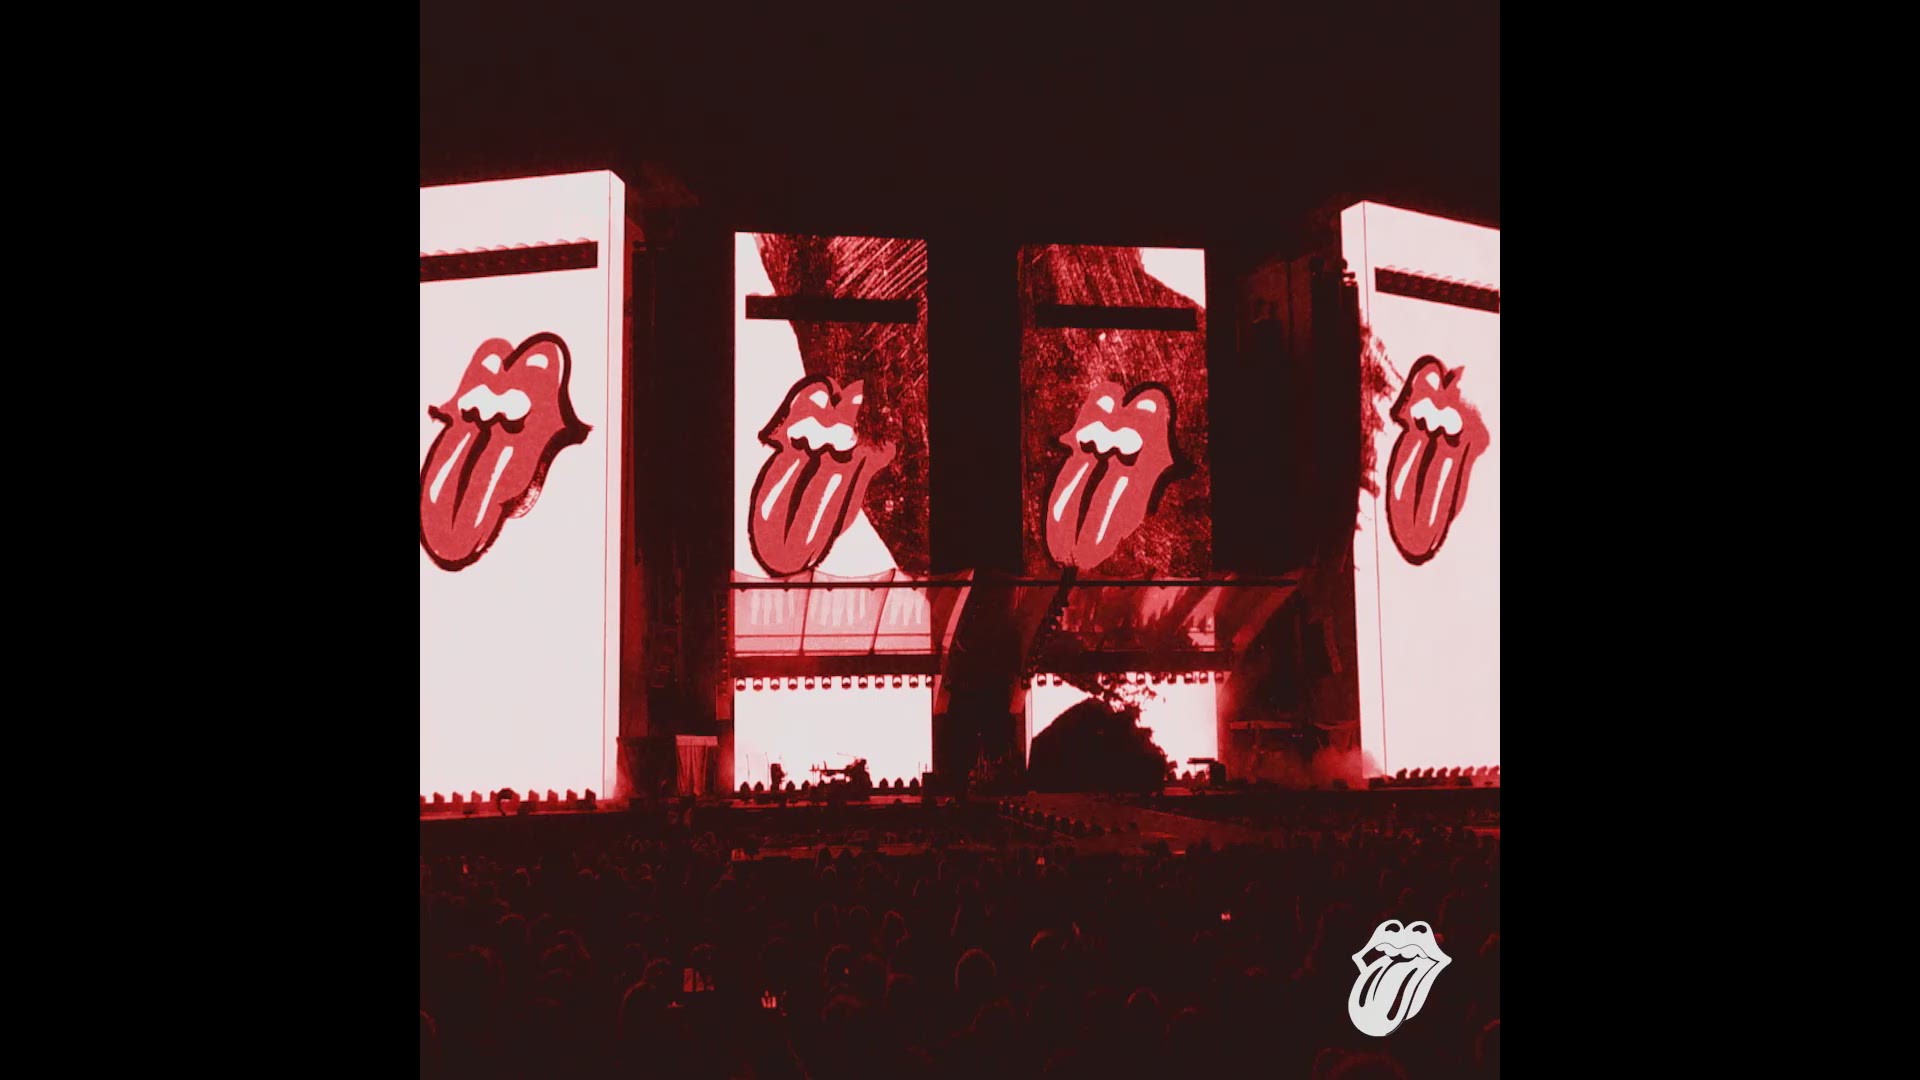 The Stones are back!